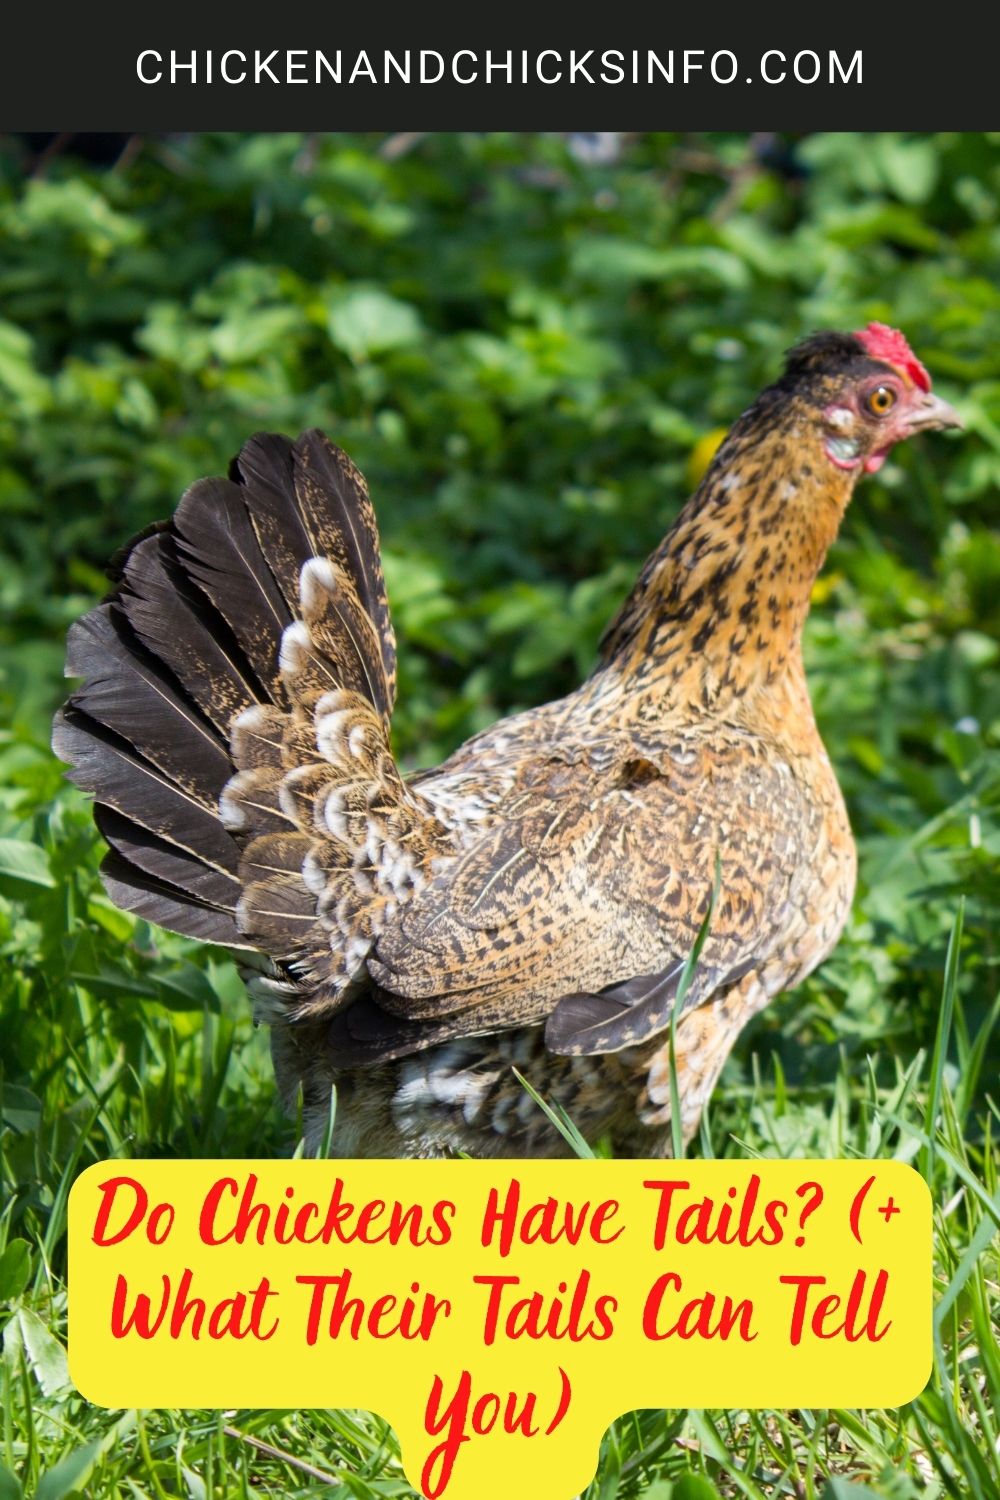 Do Chickens Have Tails? (+ What Their Tails Can Tell You) poster.
